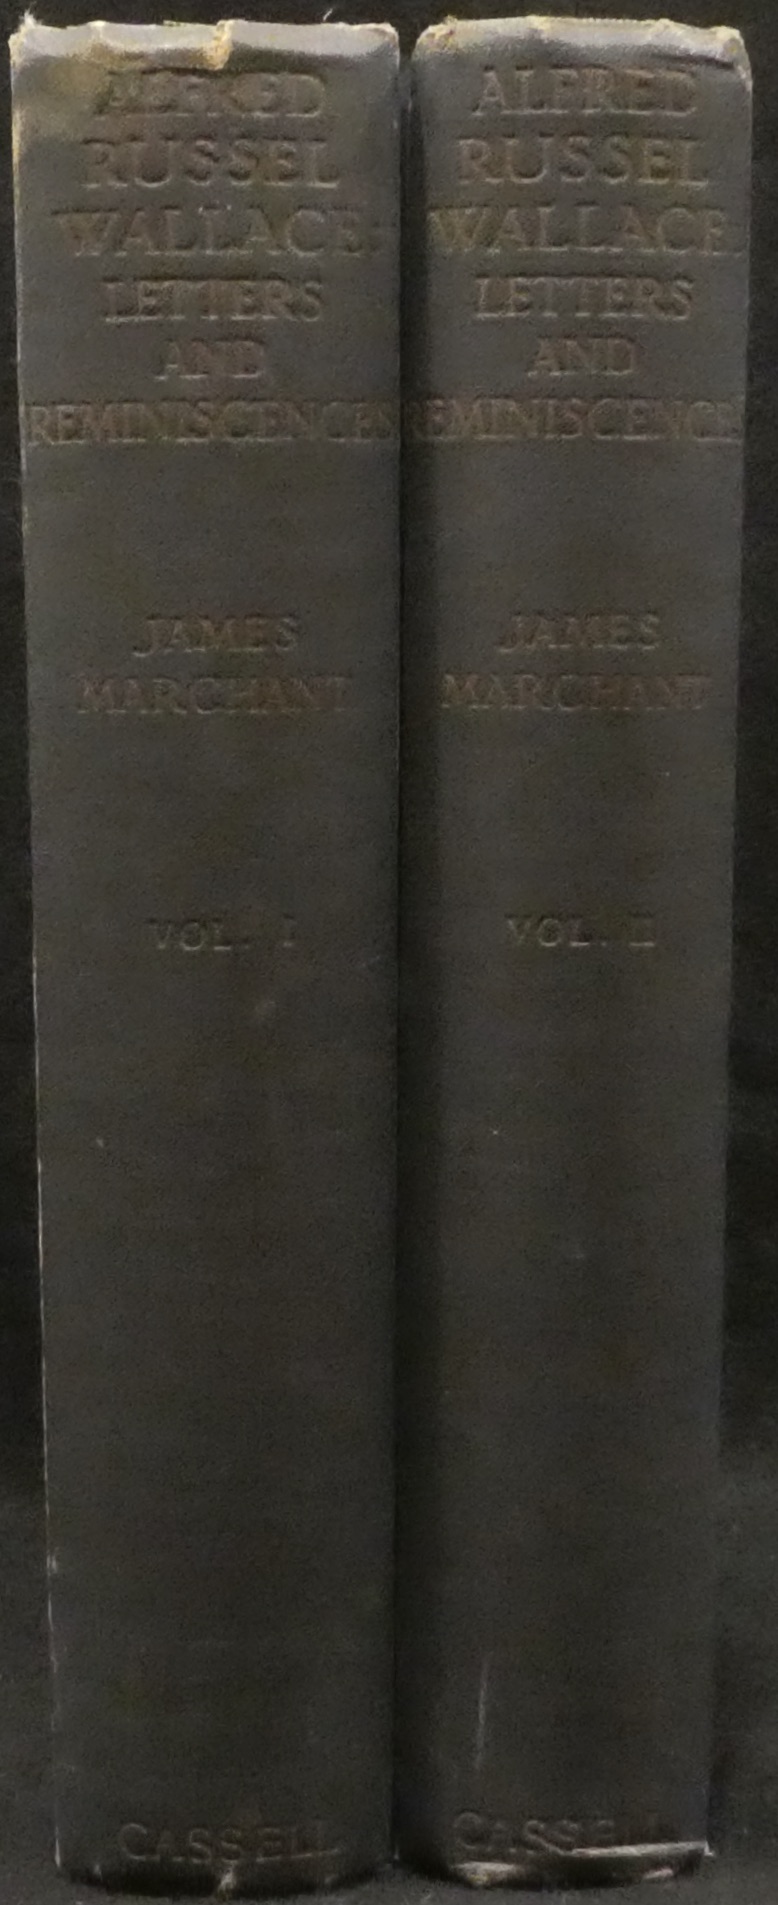 Marchant, James ed. 1916. Alfred Russel Wallace letters and reminiscences.  London: Cassell. Volume 1.